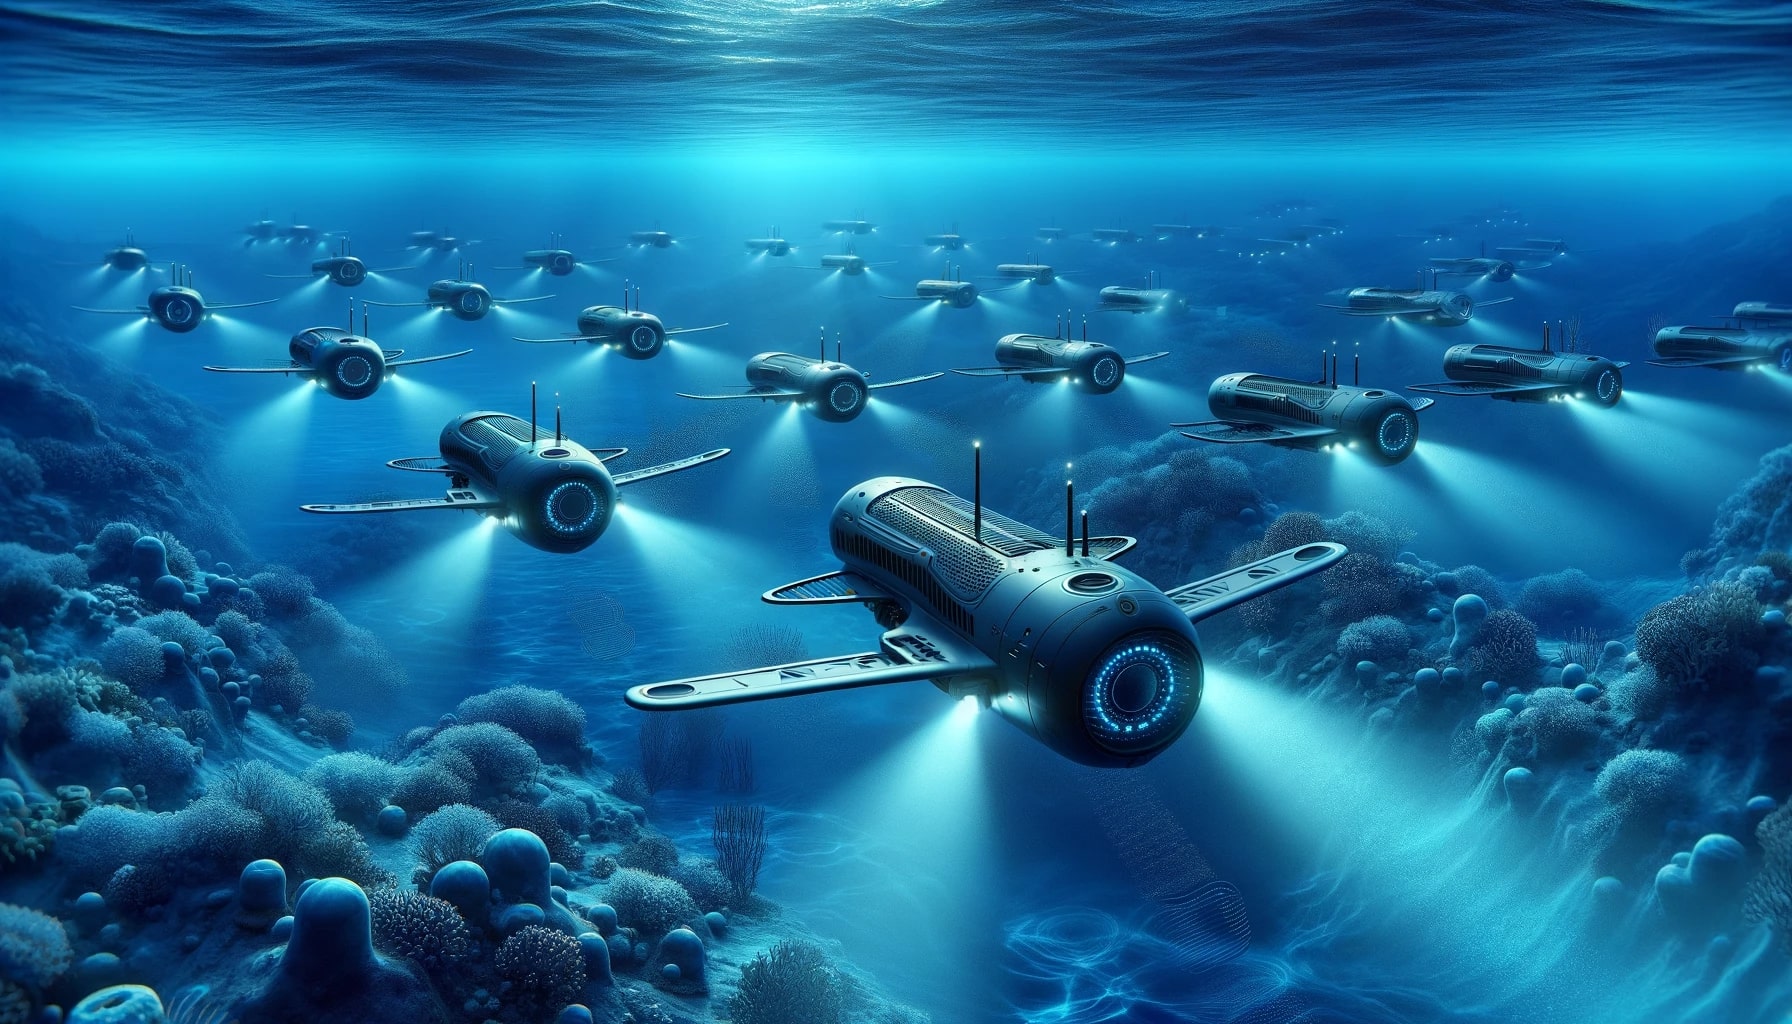 A fleet of advanced underwater drones navigating the depths of the ocean. These autonomous underwater vehicles are sleek and hydrodynamic, designed with stealth in mind.